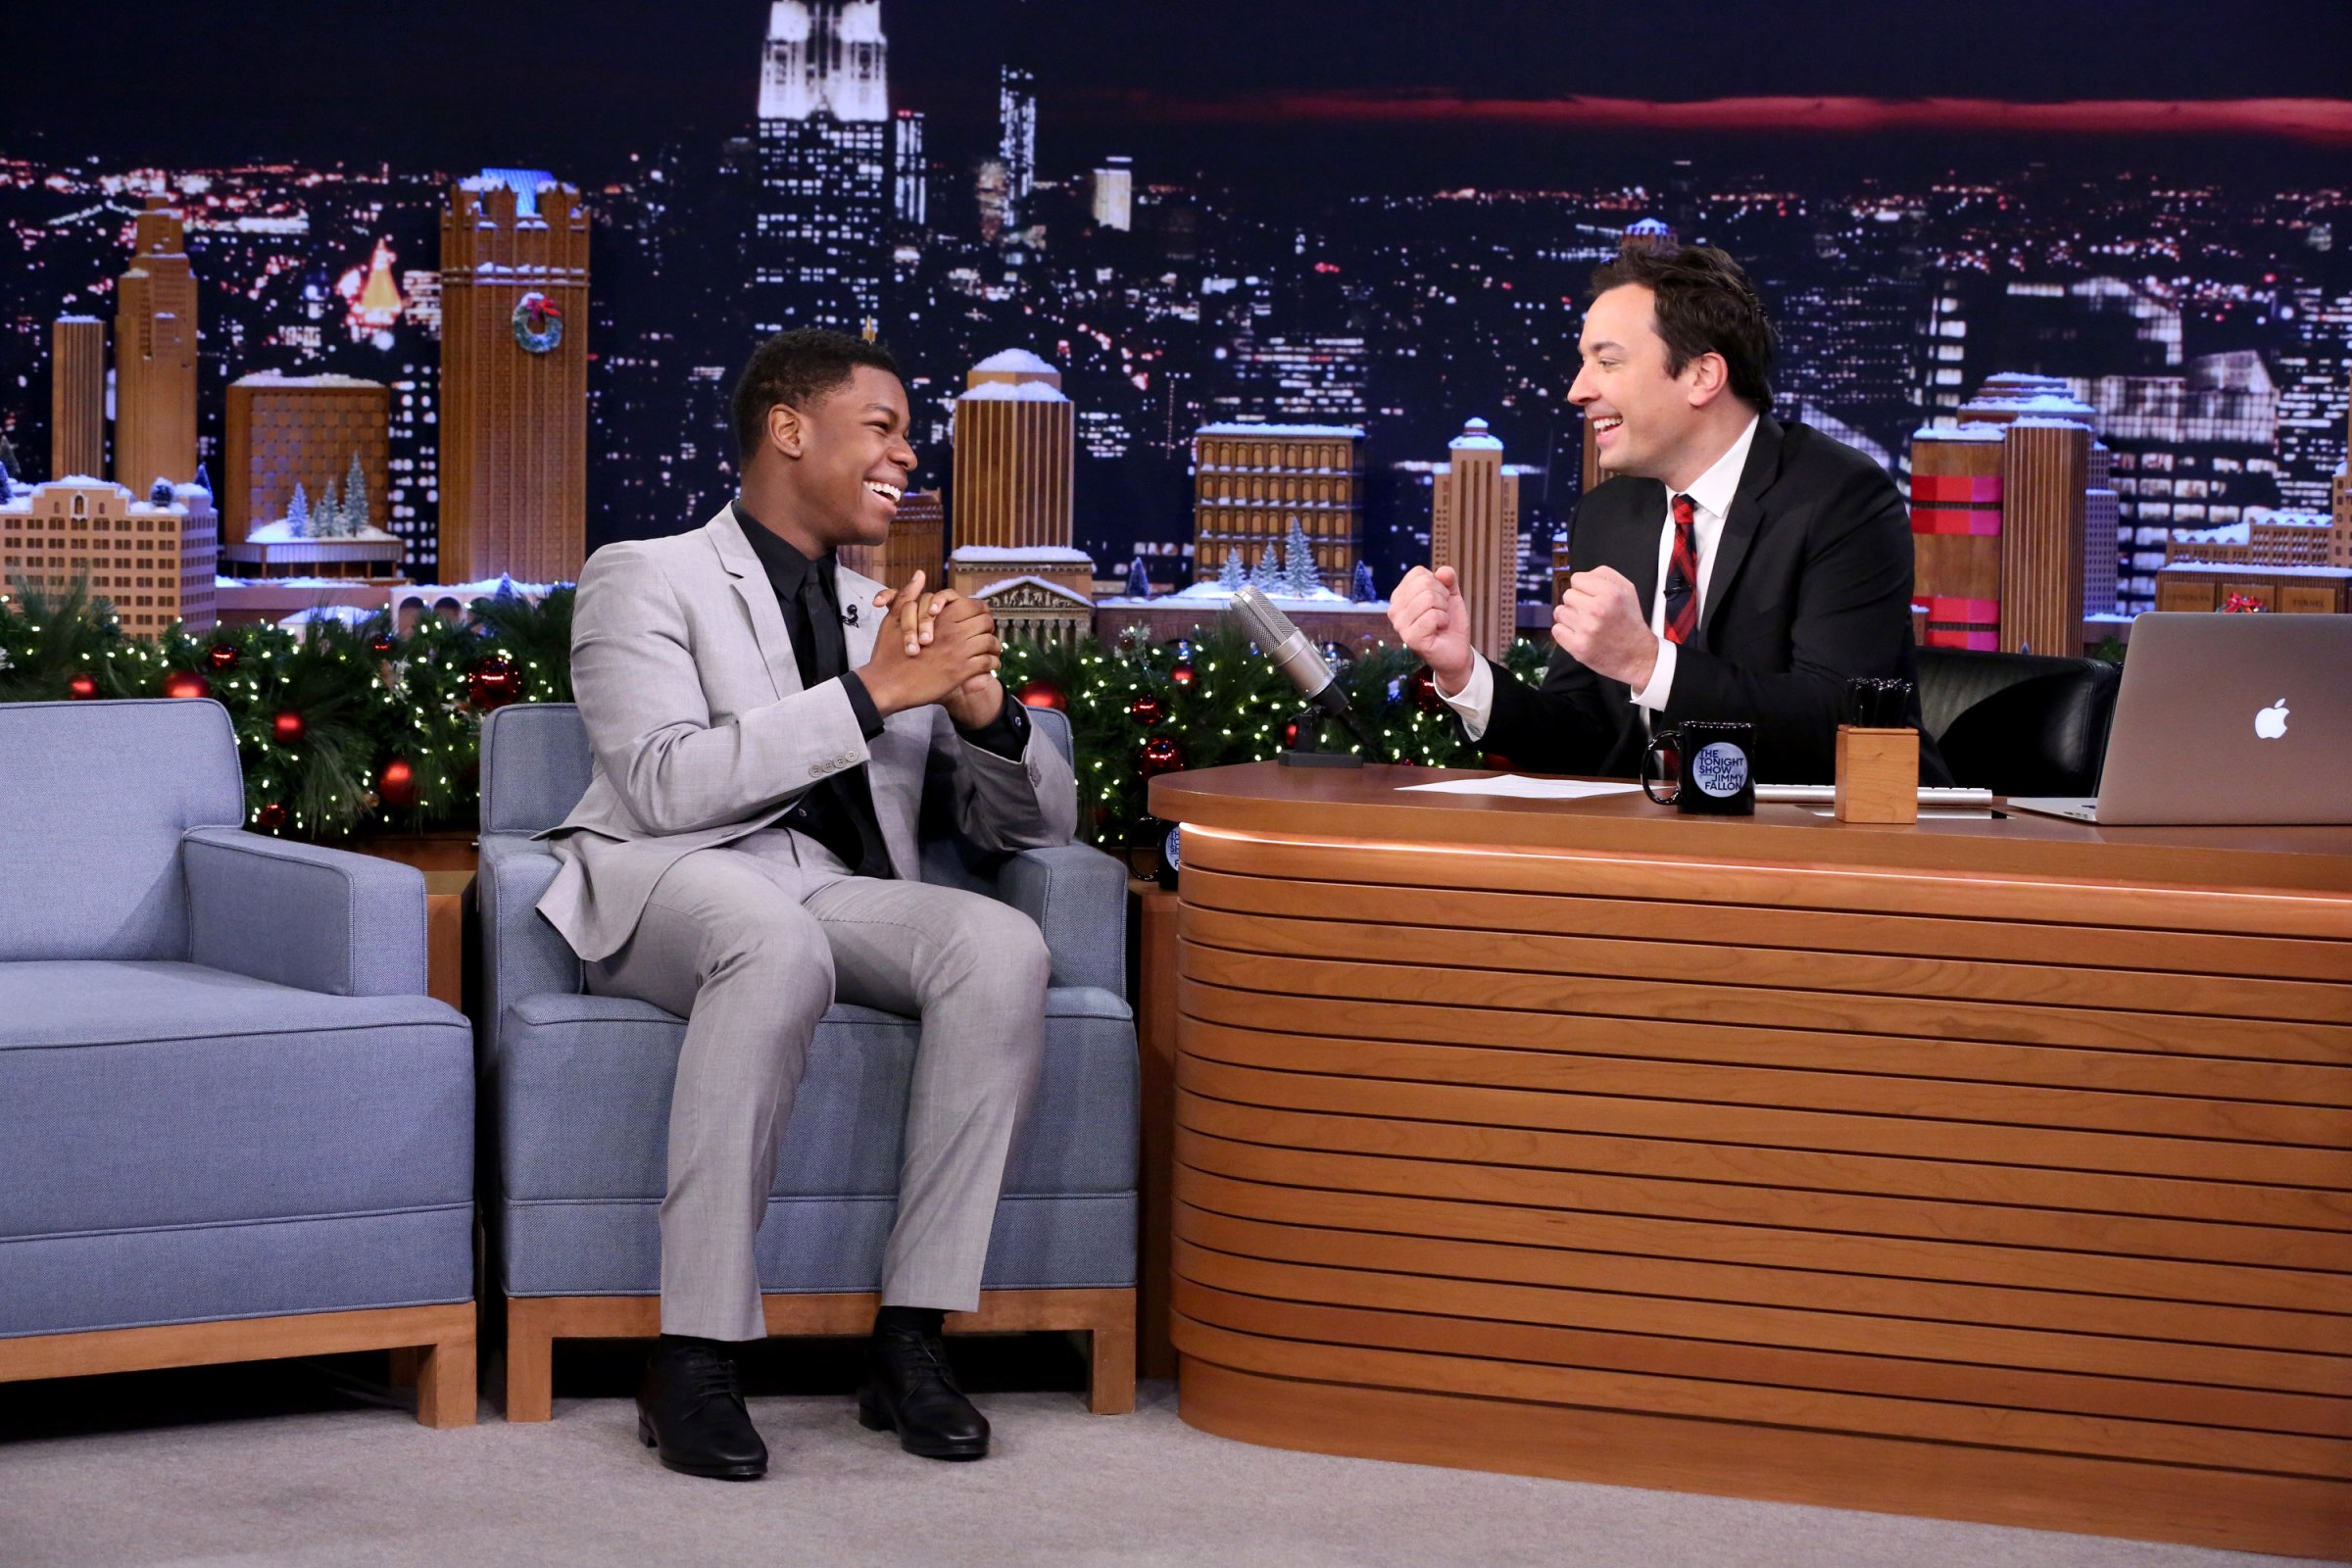 Actor John Boyega during an interview with host Jimmy Fallon on December 18, 2015